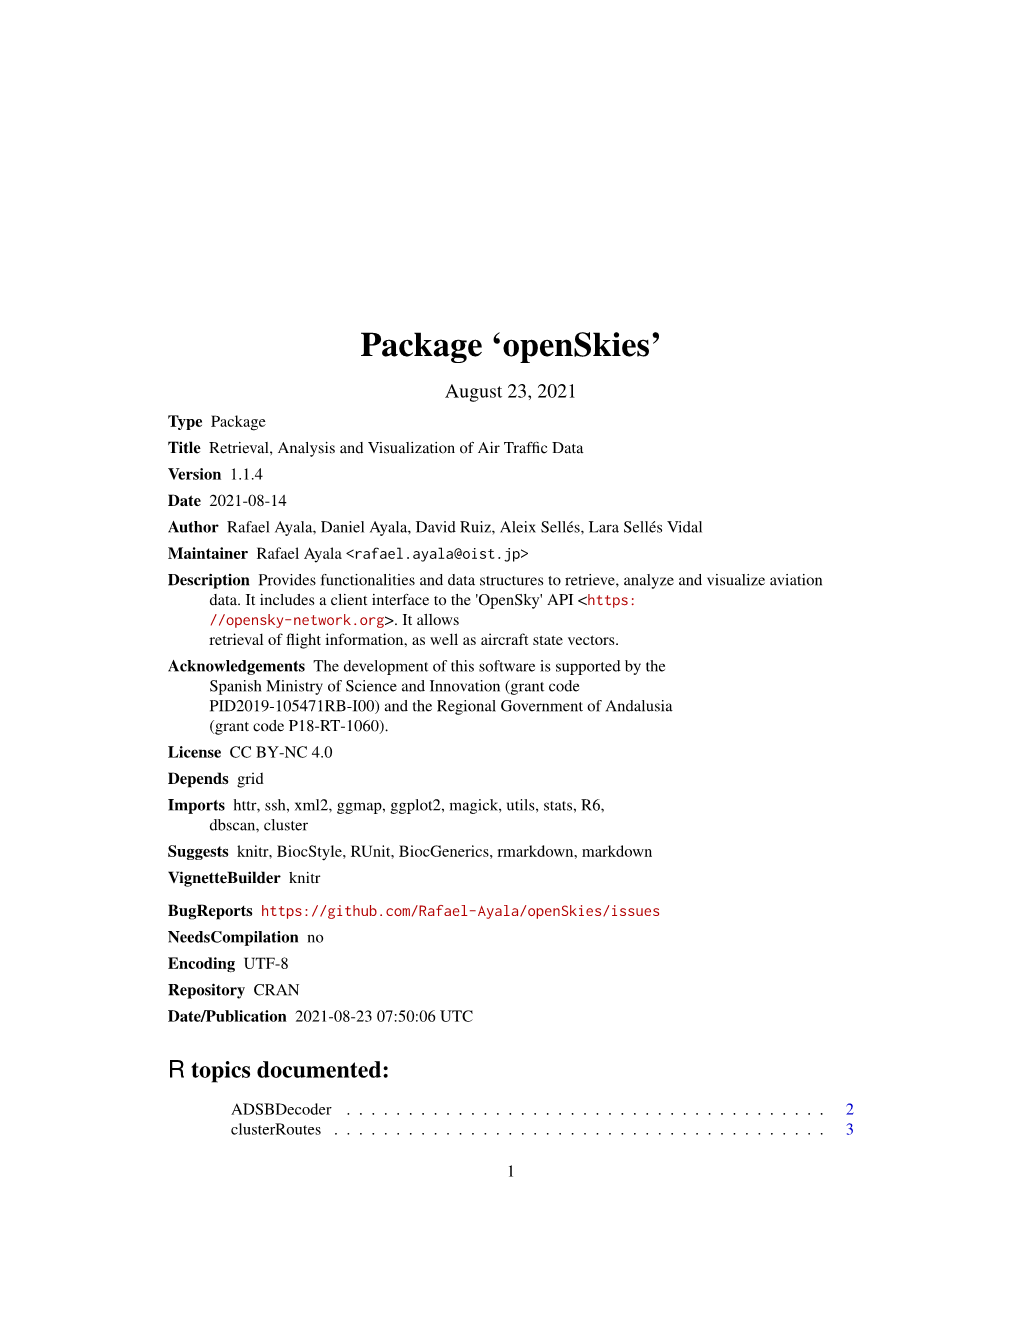 Openskies: an R Package to Retrieve, Analyze And